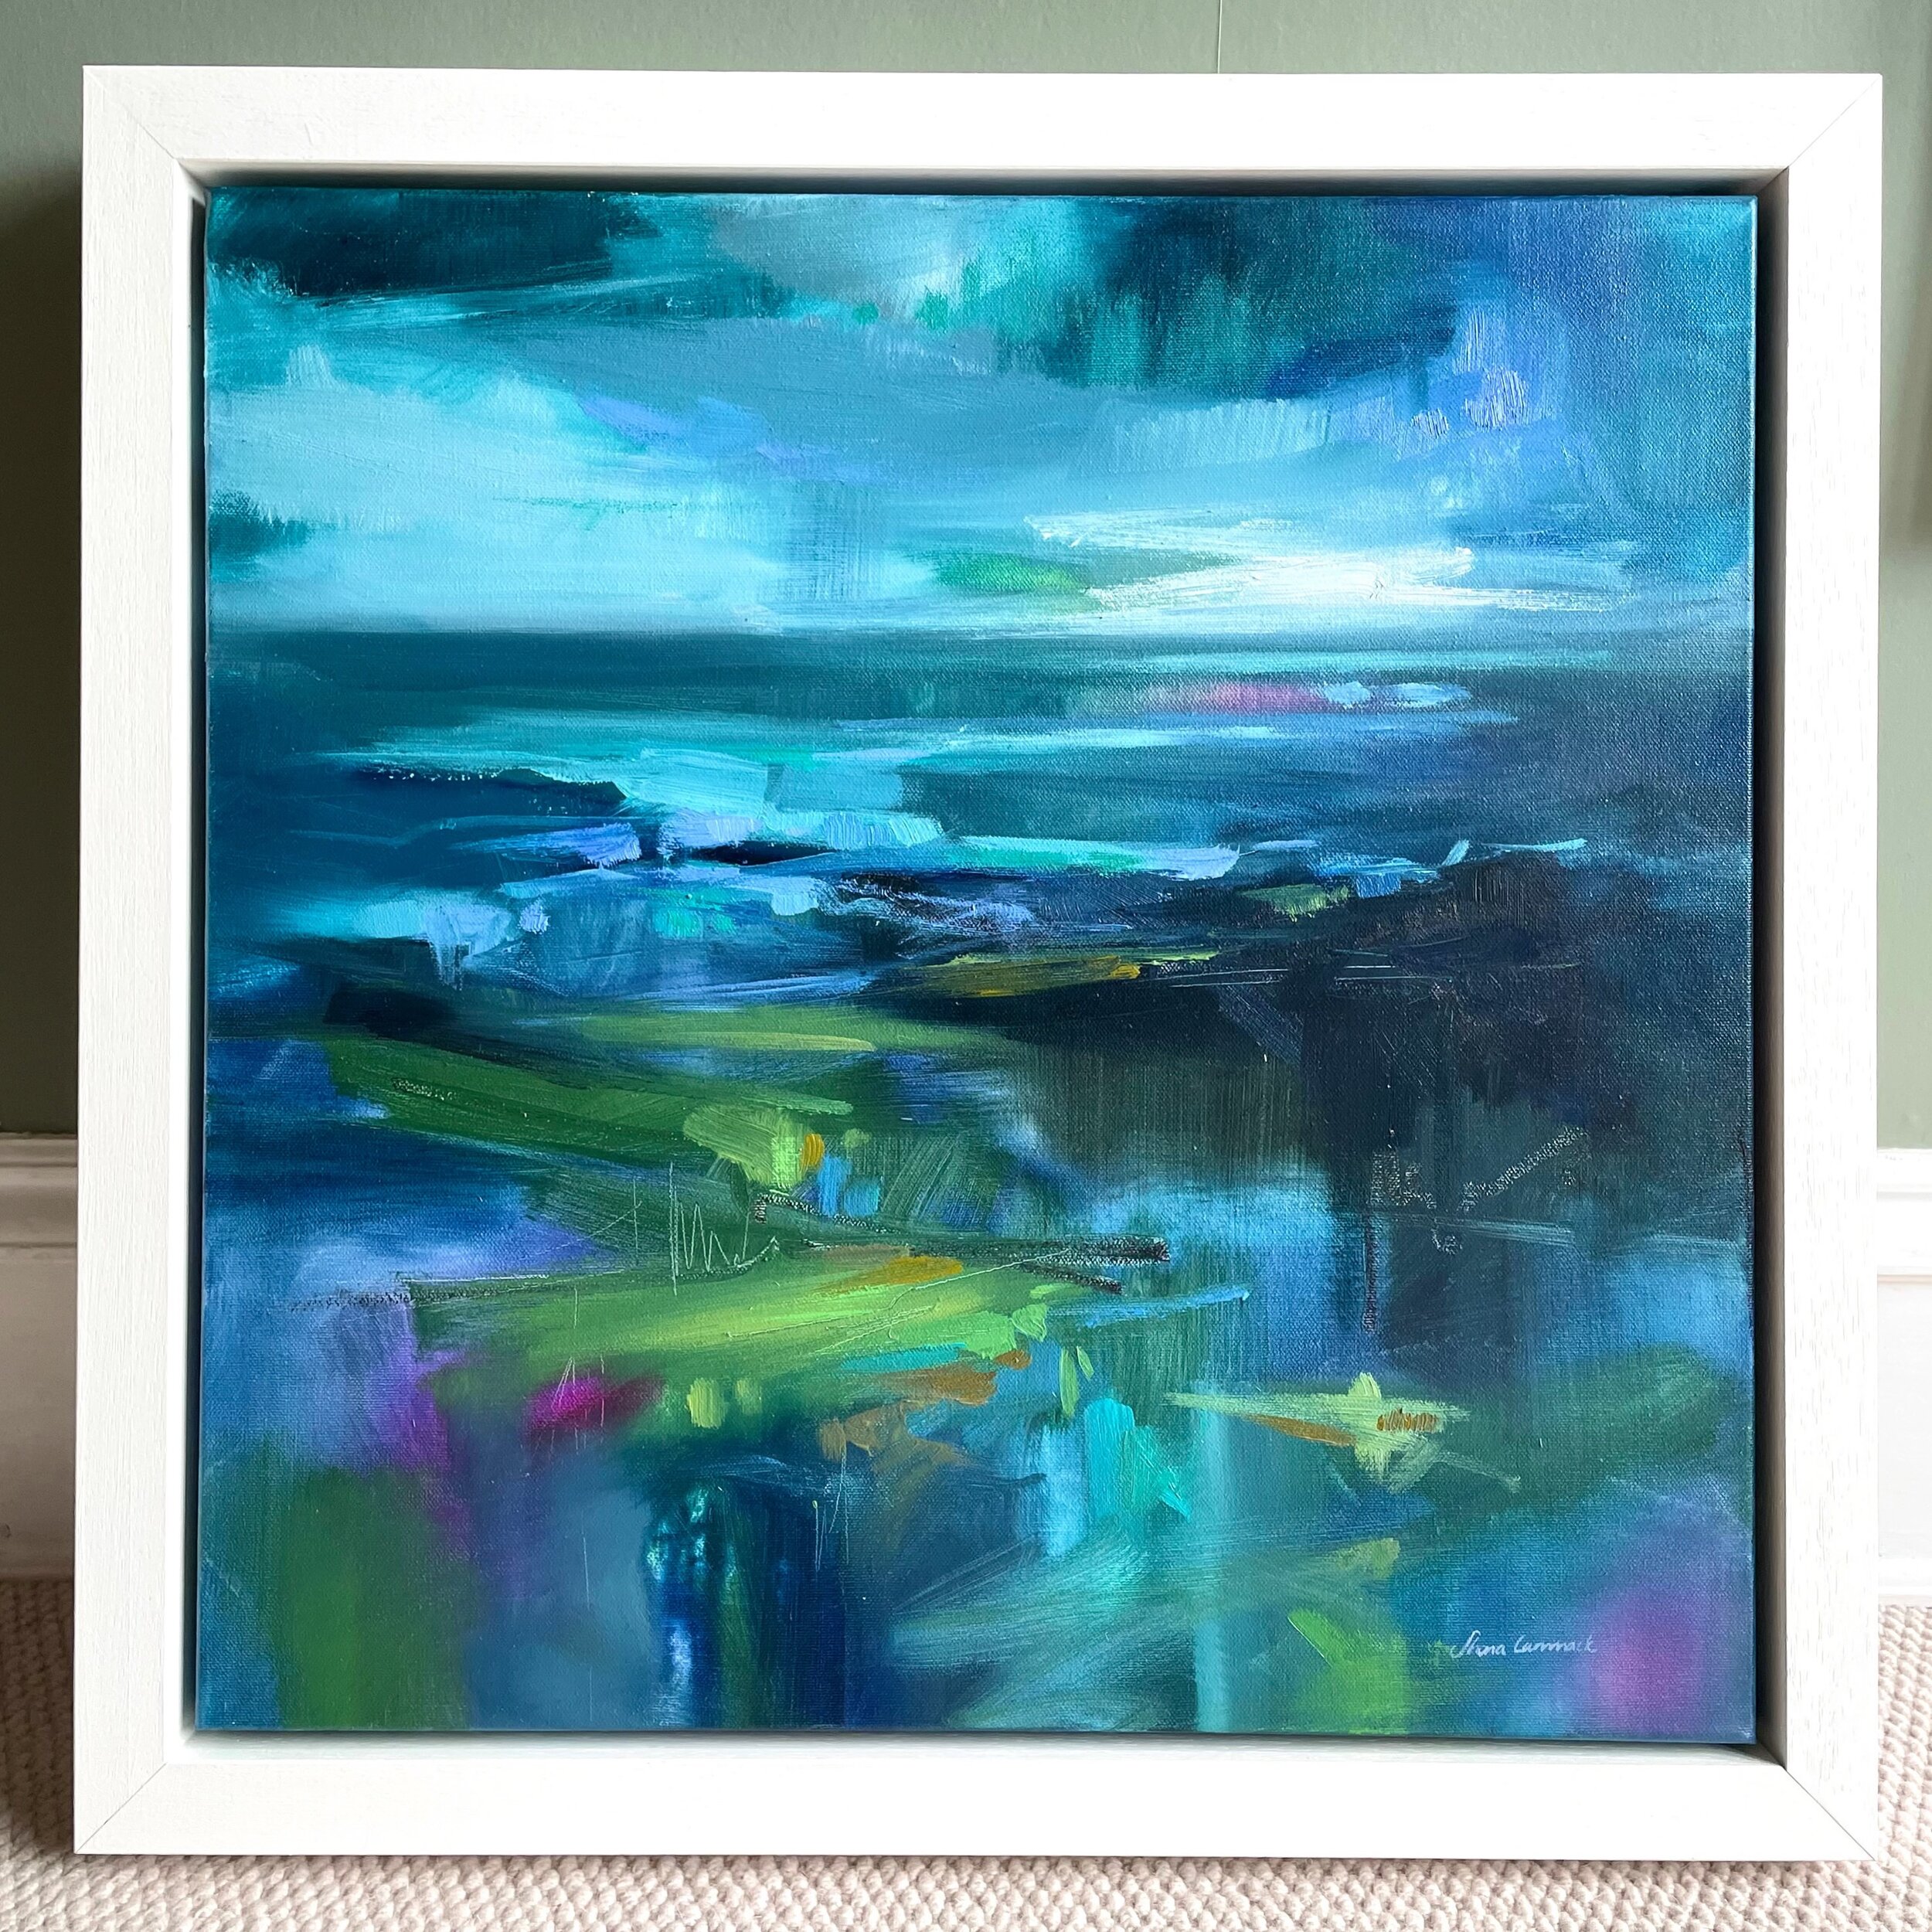 Distance ✨One of my paintings which found a new home at @borders_art_fair at the weekend. What a weekend. My favourite part was being surrounded by so much inspirational artwork and meeting so many like-minded artists and art lovers. Feeling grateful